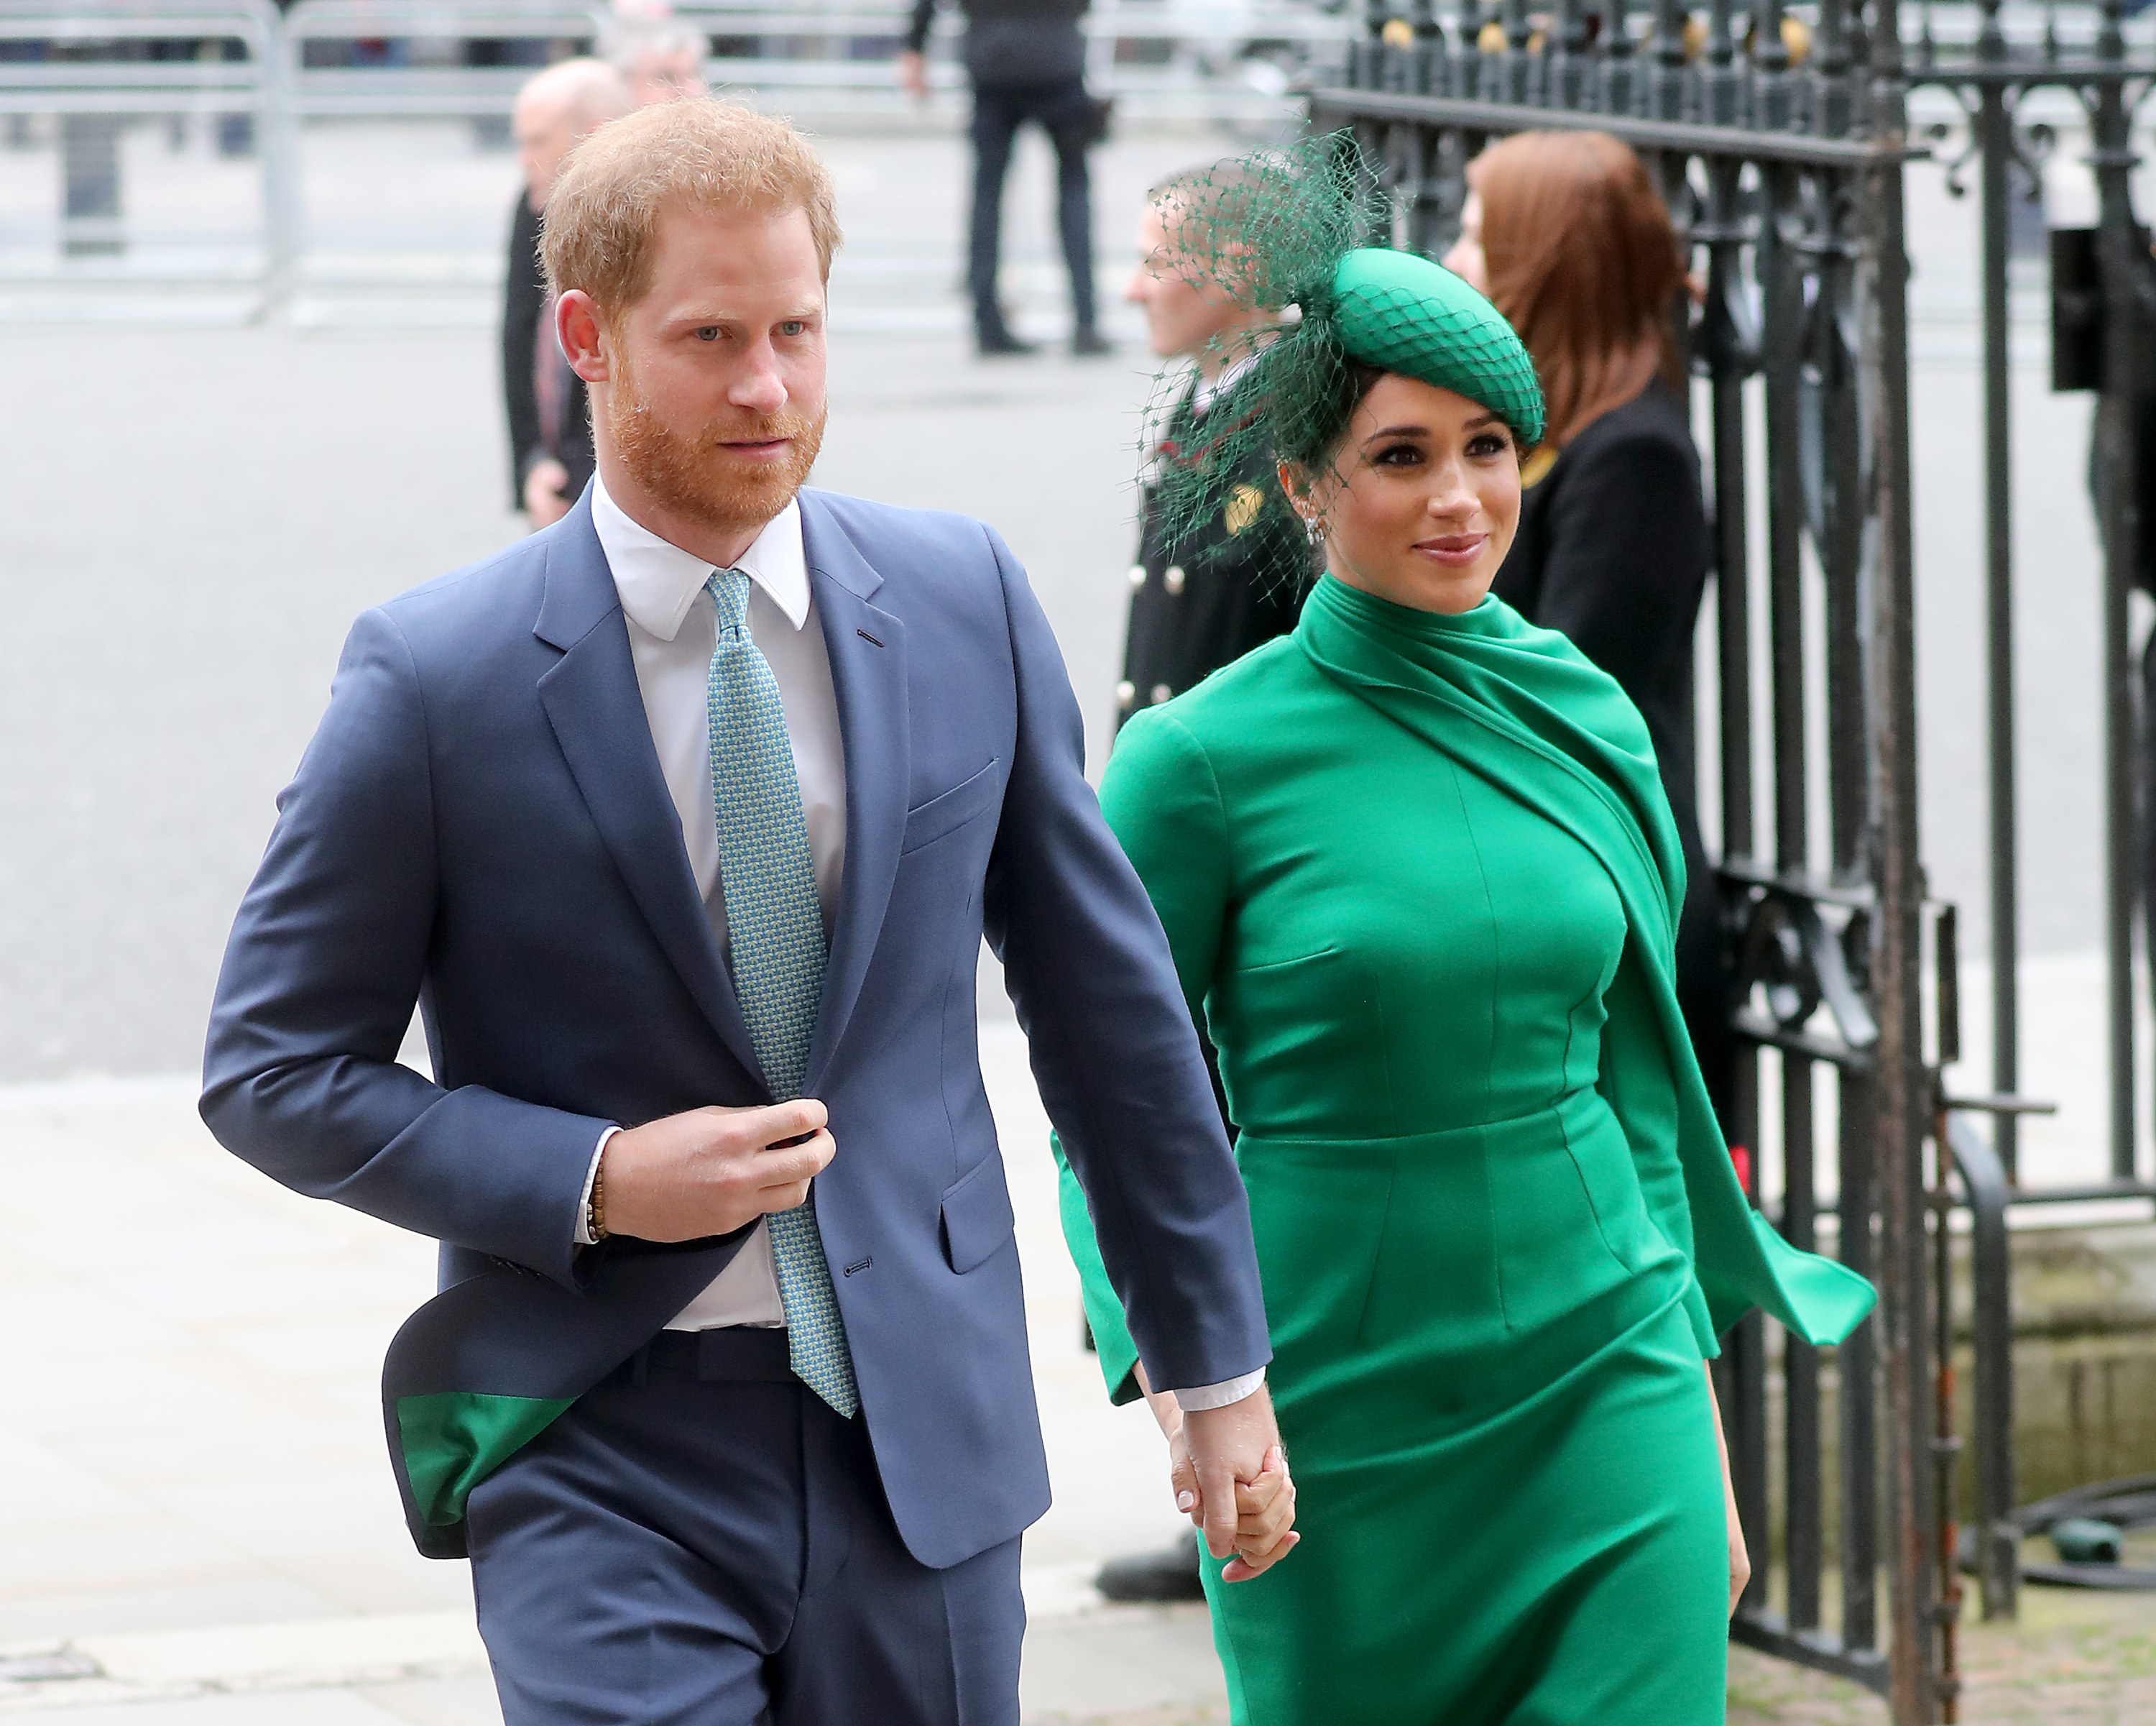 Harry and Meghan walking into a church hand-in-hand